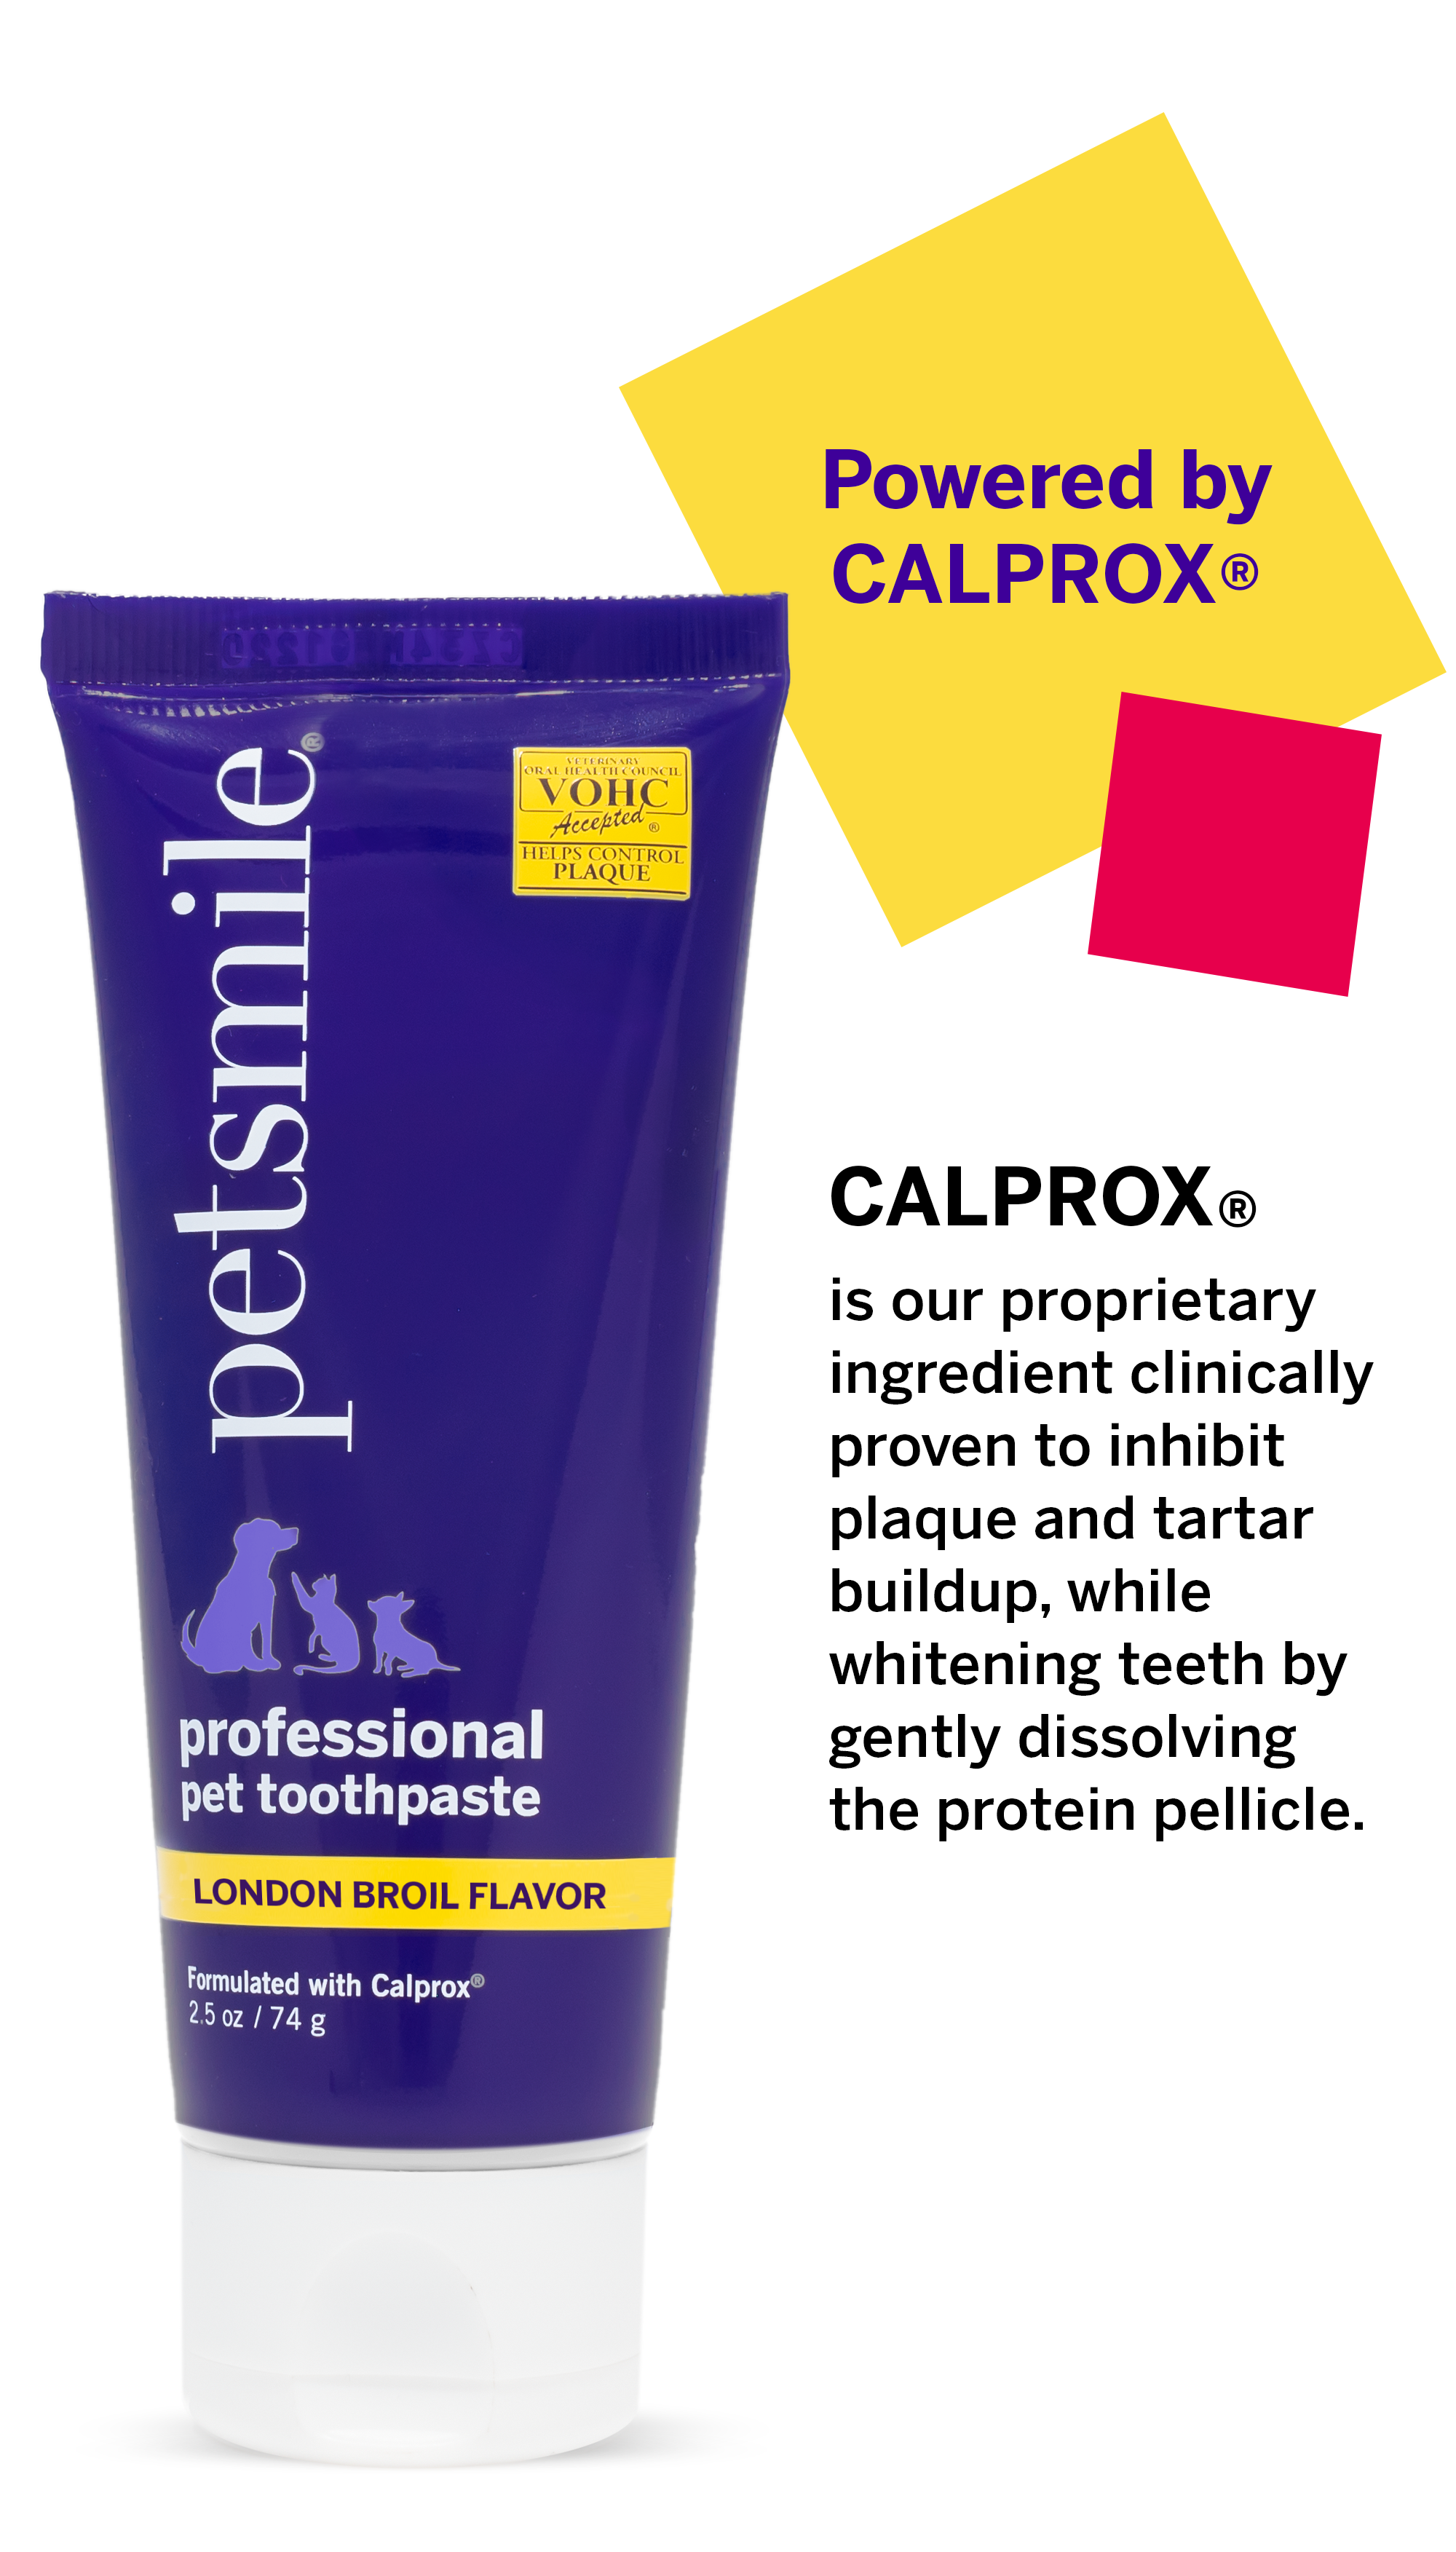 VOHC sealed small petsmile professional pet toothpaste , 2.5 OZ London Broil Flavor toothpaste , Small toothpaste with Calprox , Calprox for superior dental care , BPA free pet toothpaste , Calprox inhibits plaque and tartar